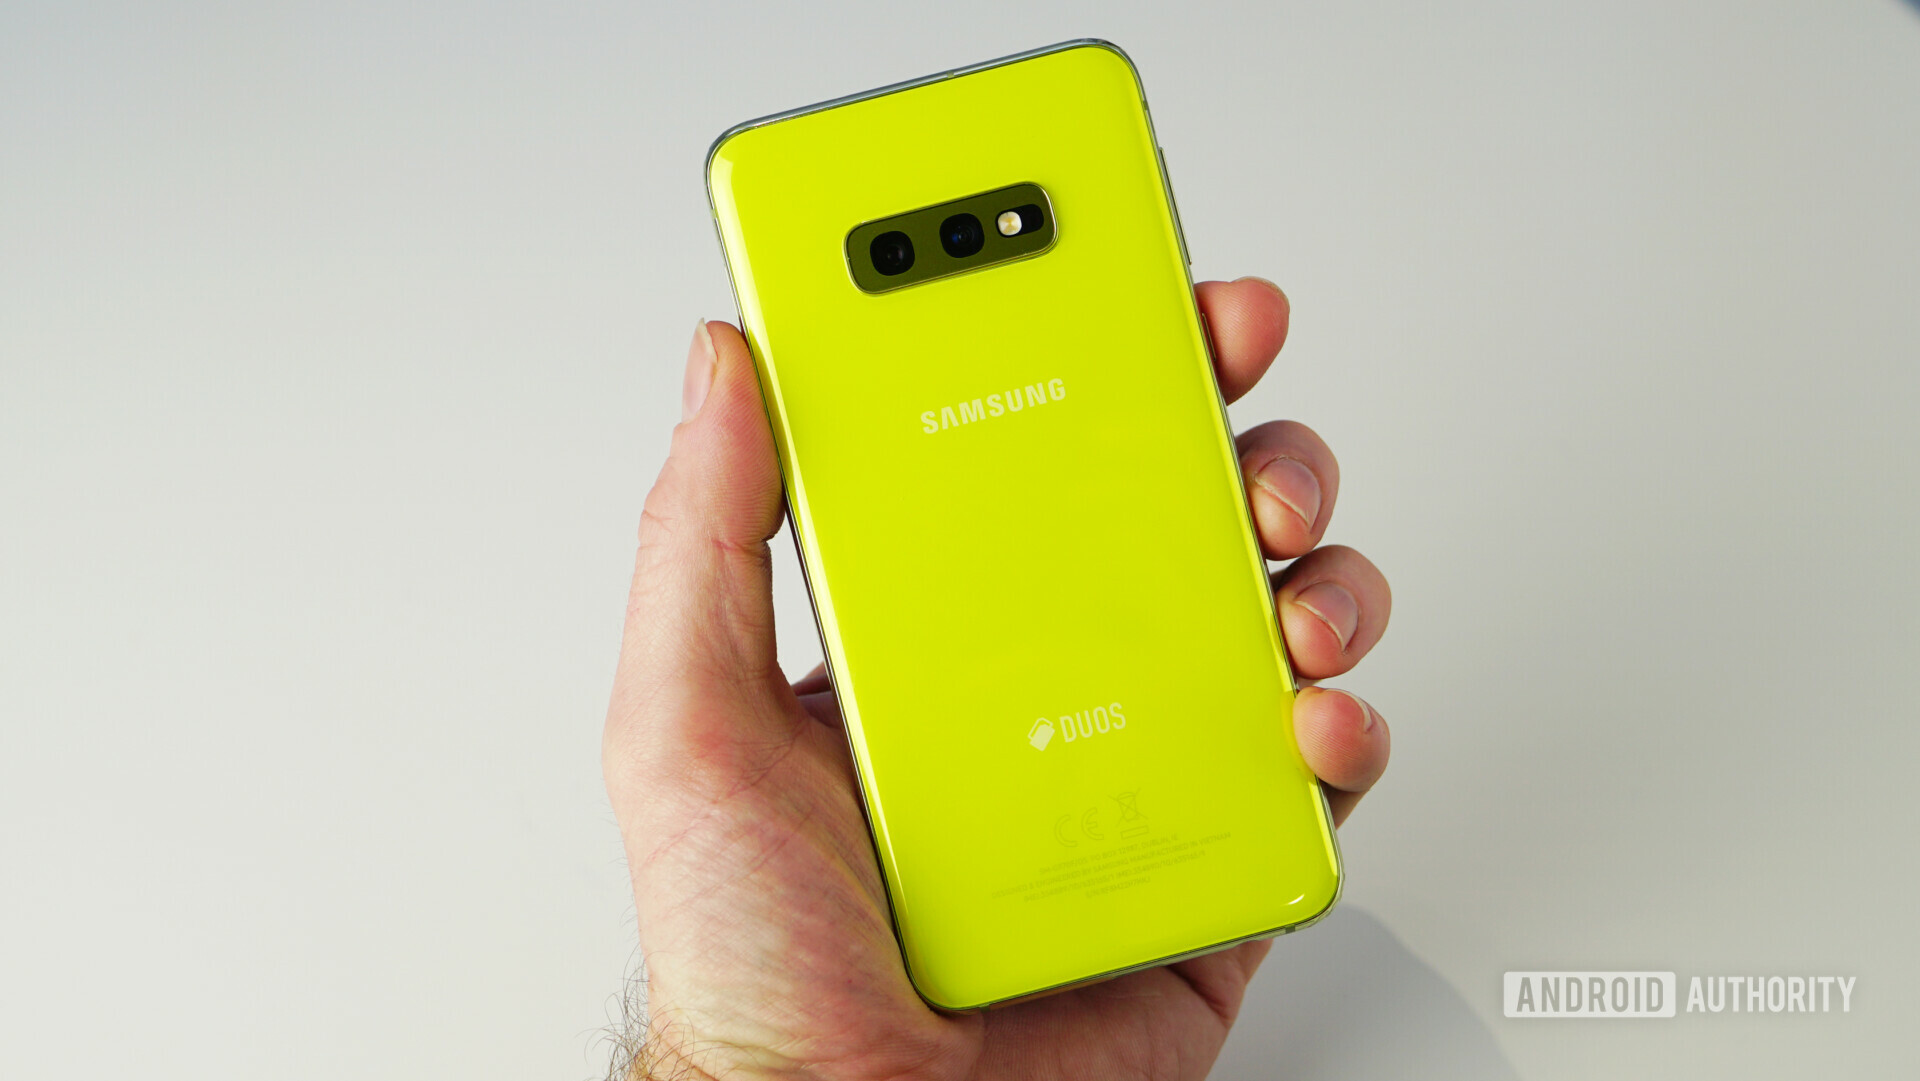 A hand holding the Samsung Galaxy S10e showing the back view.